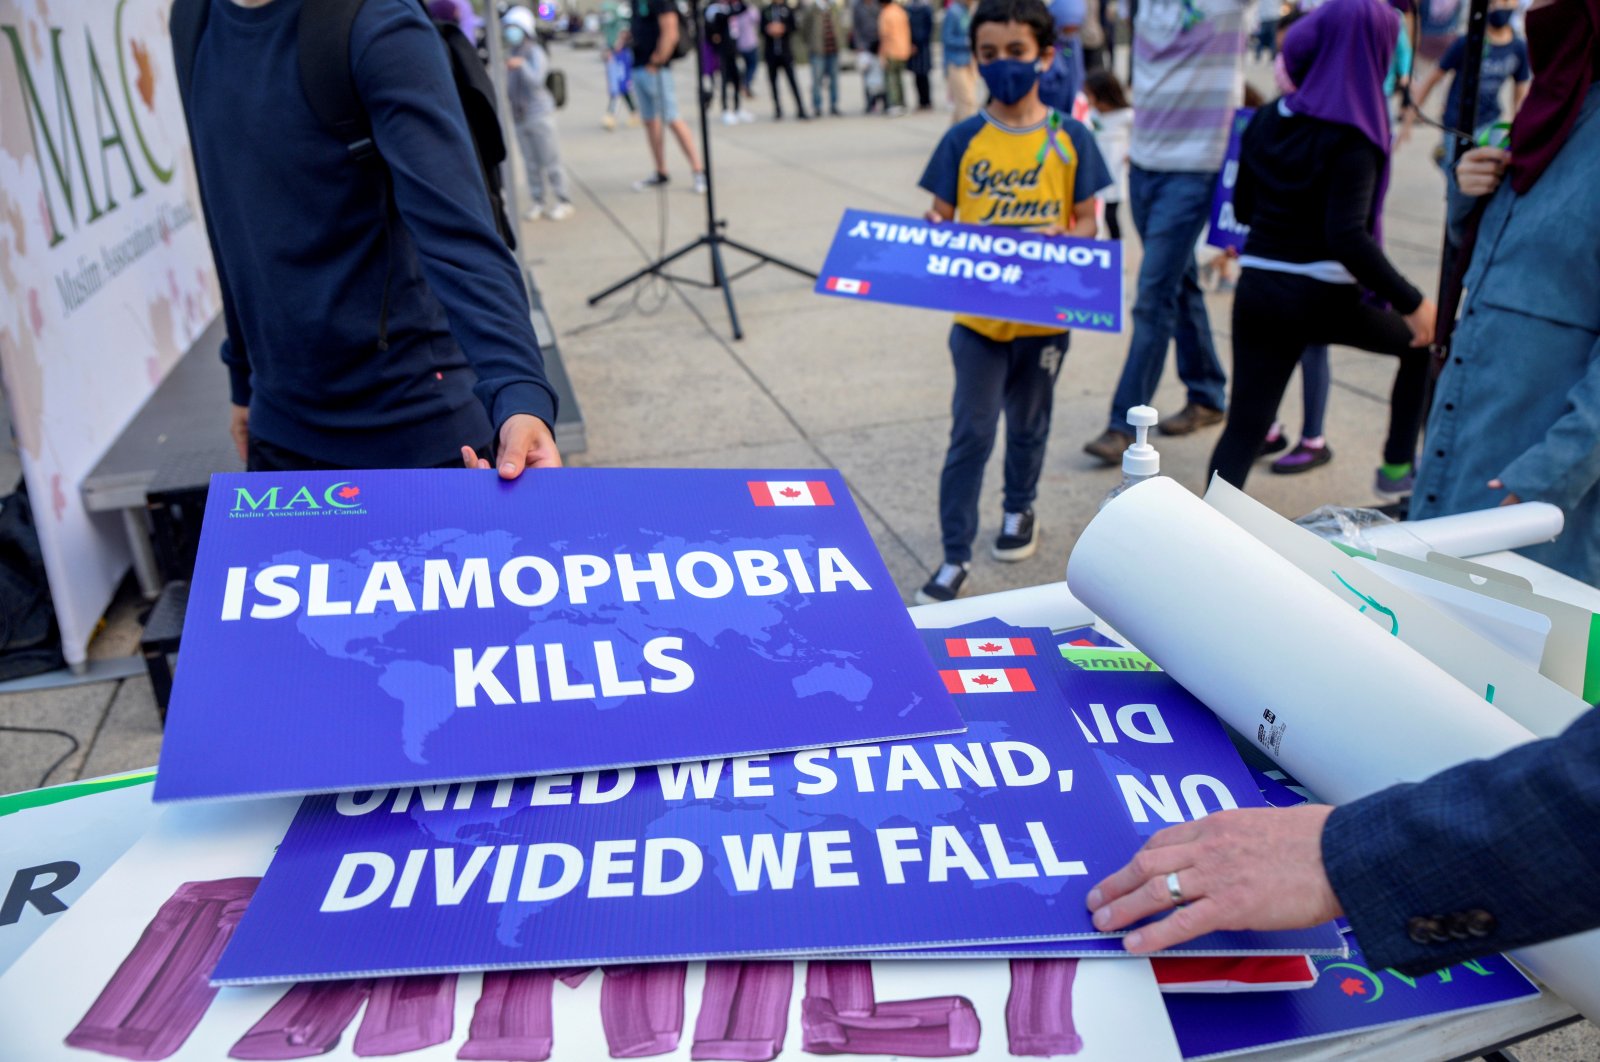 Attendees return signs after a rally to highlight Islamophobia, sponsored by the Muslim Association of Canada, Toronto, Ontario, Canada, June 18, 2021. (REUTERS Photo)